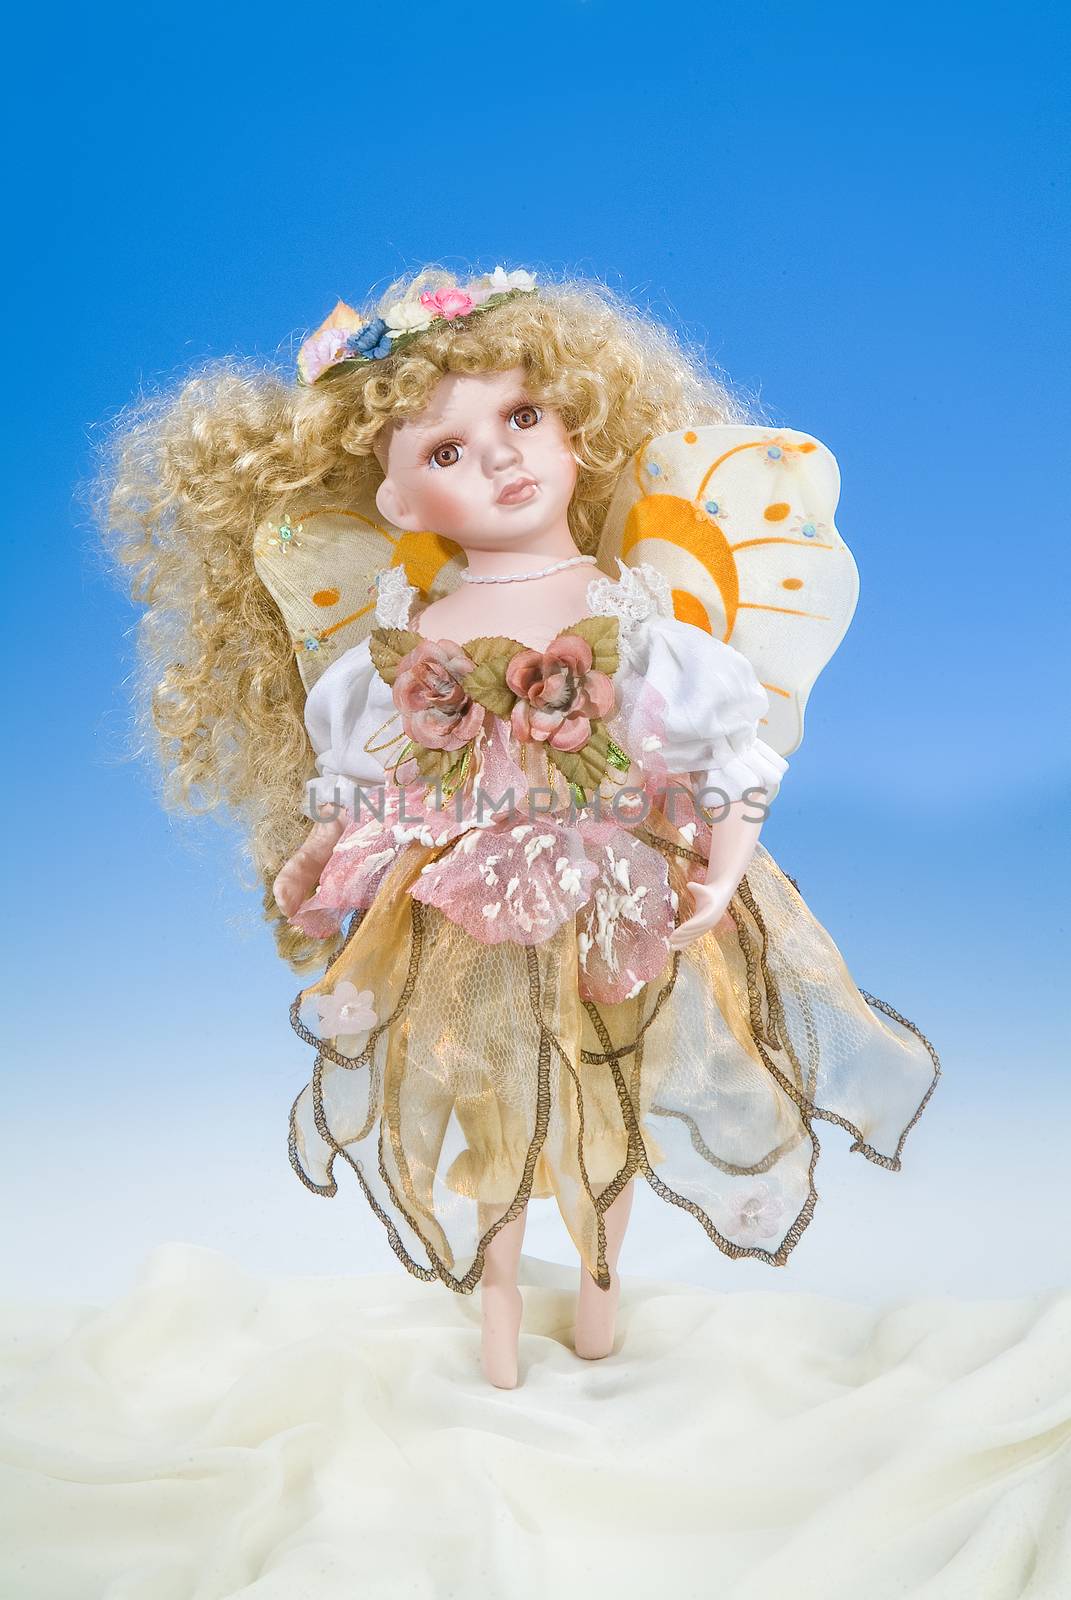 Big doll dressed in retro style on a blue and white background